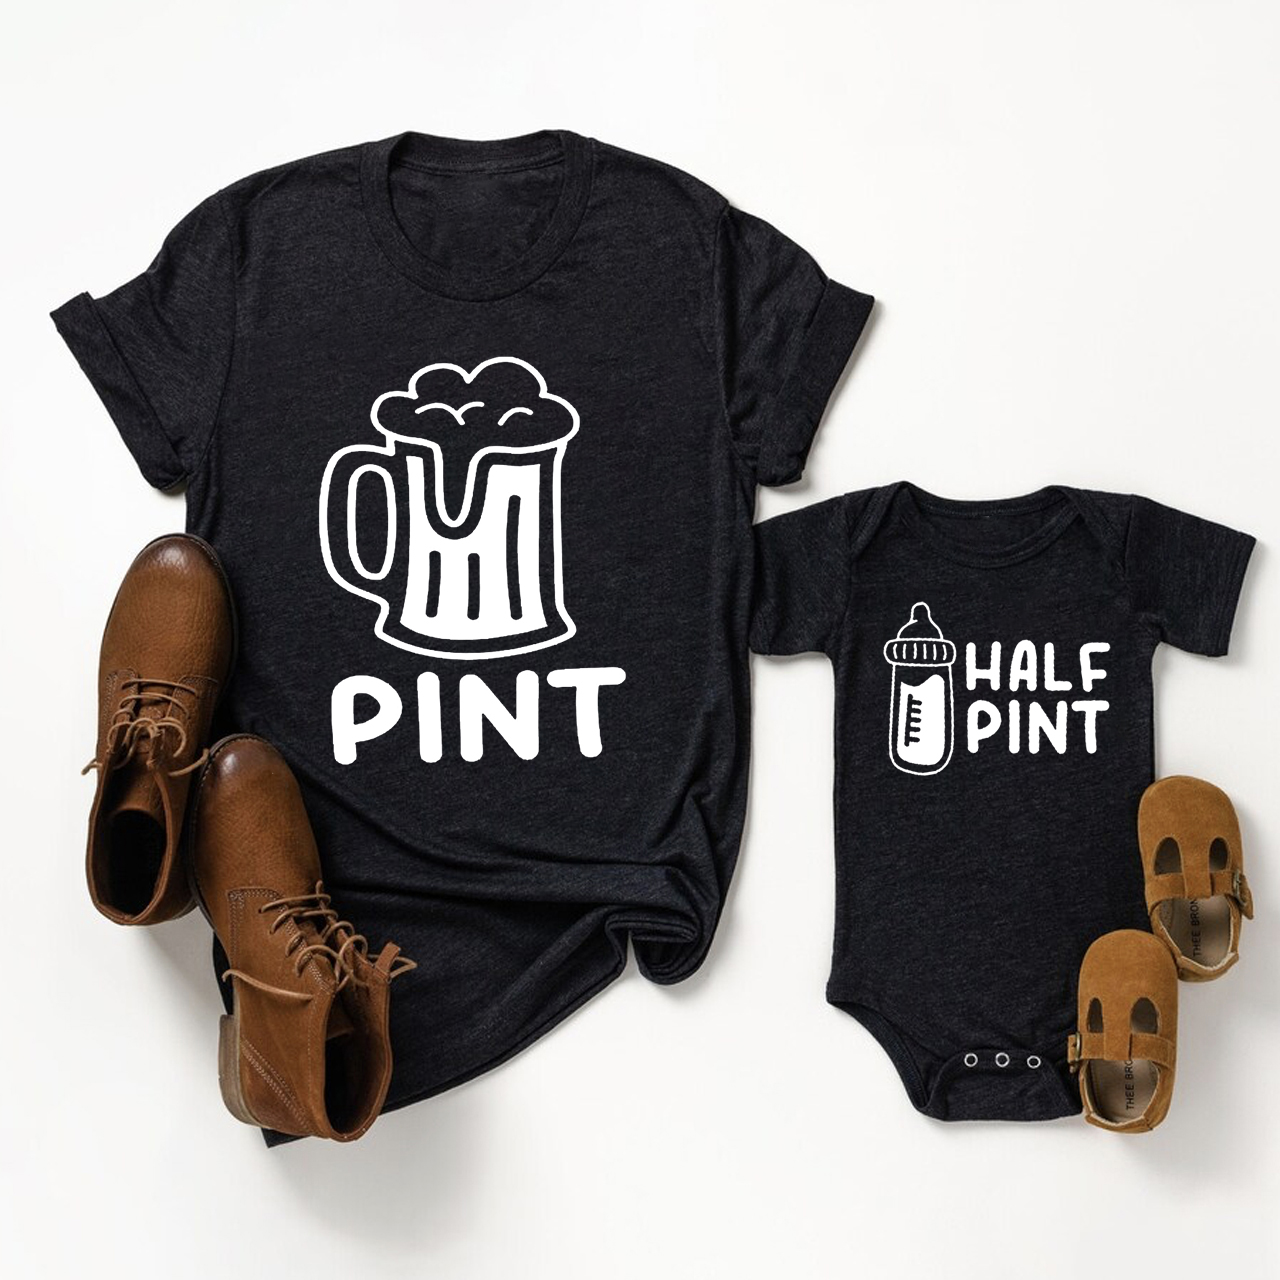 Pint And Half Pint Matching Father's Day Shirt